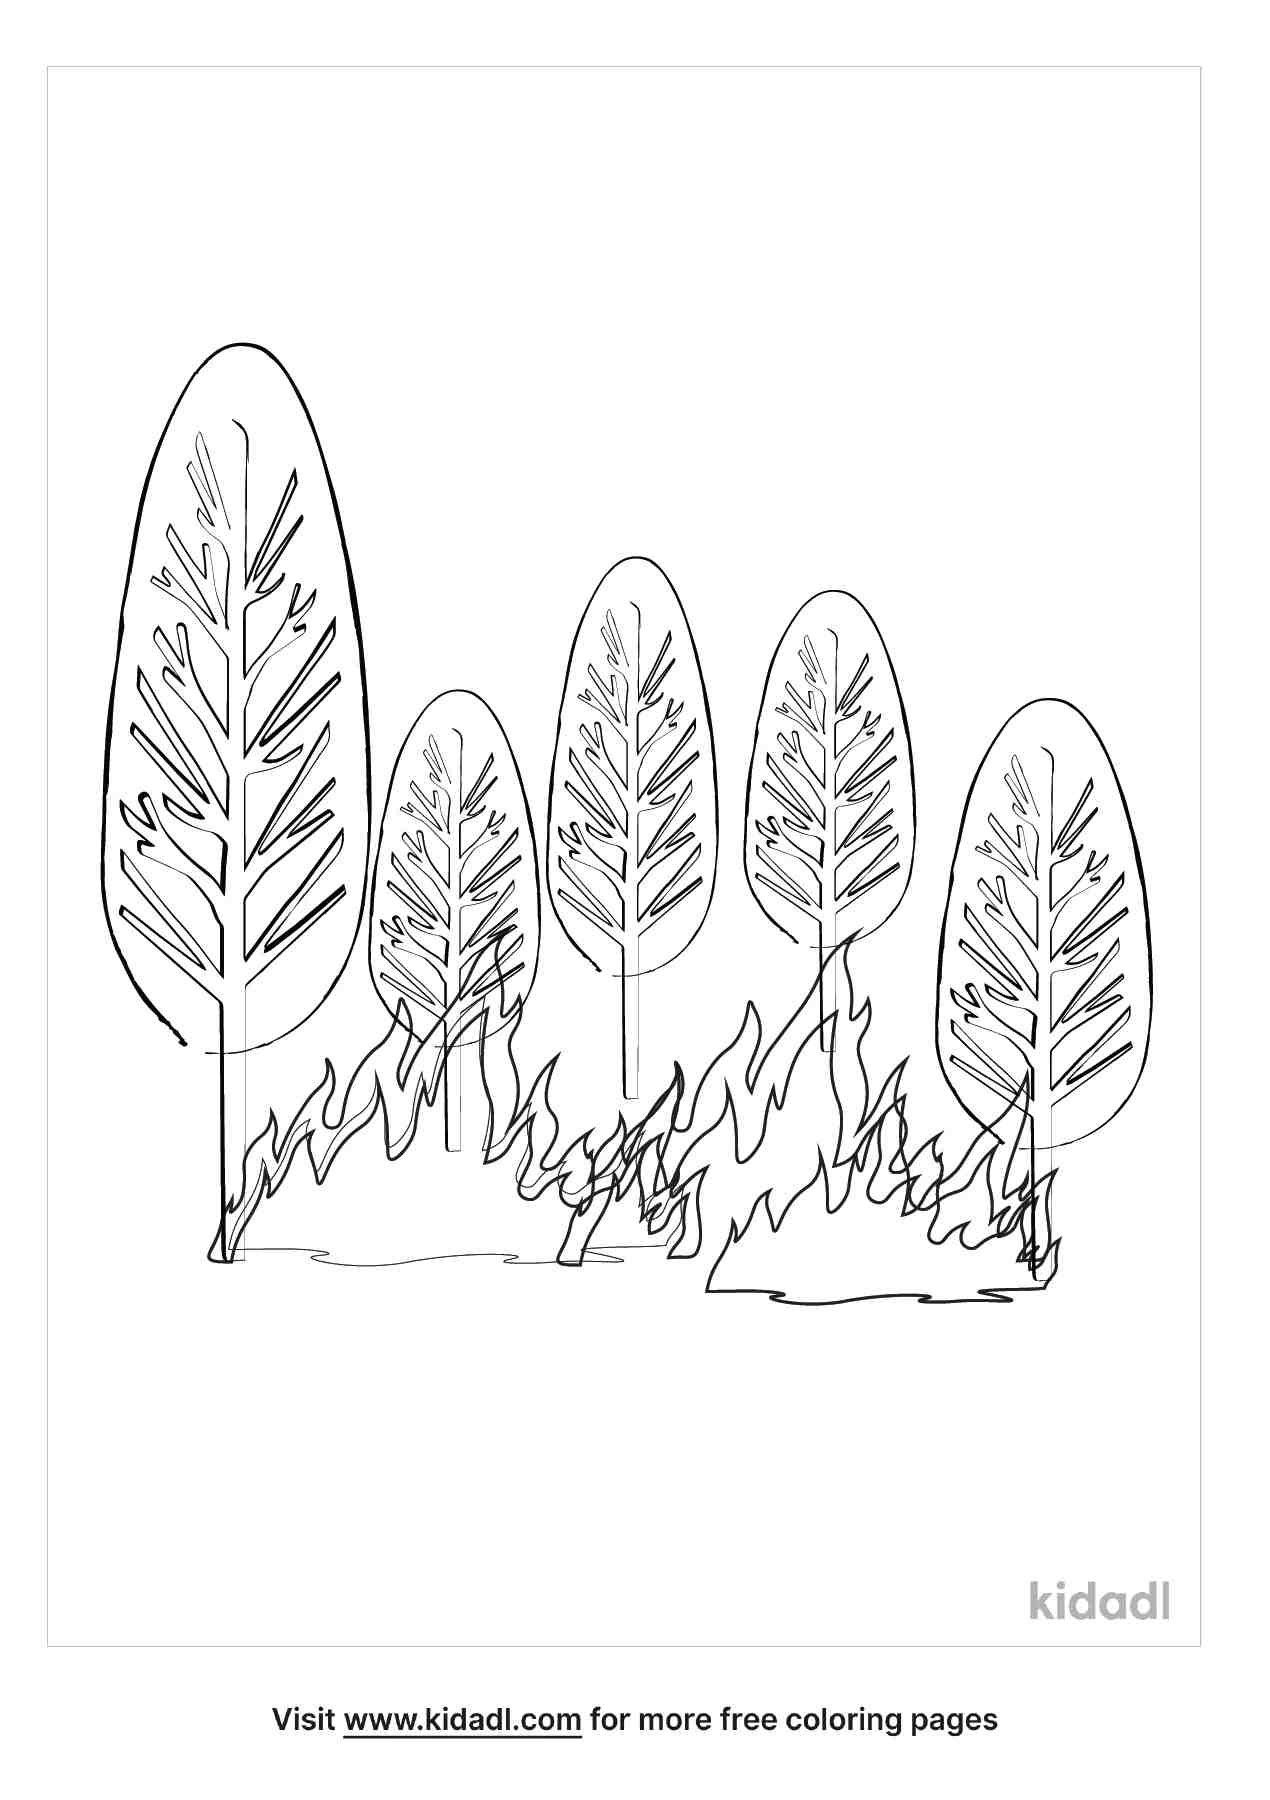 Art containing forest fire coloring page